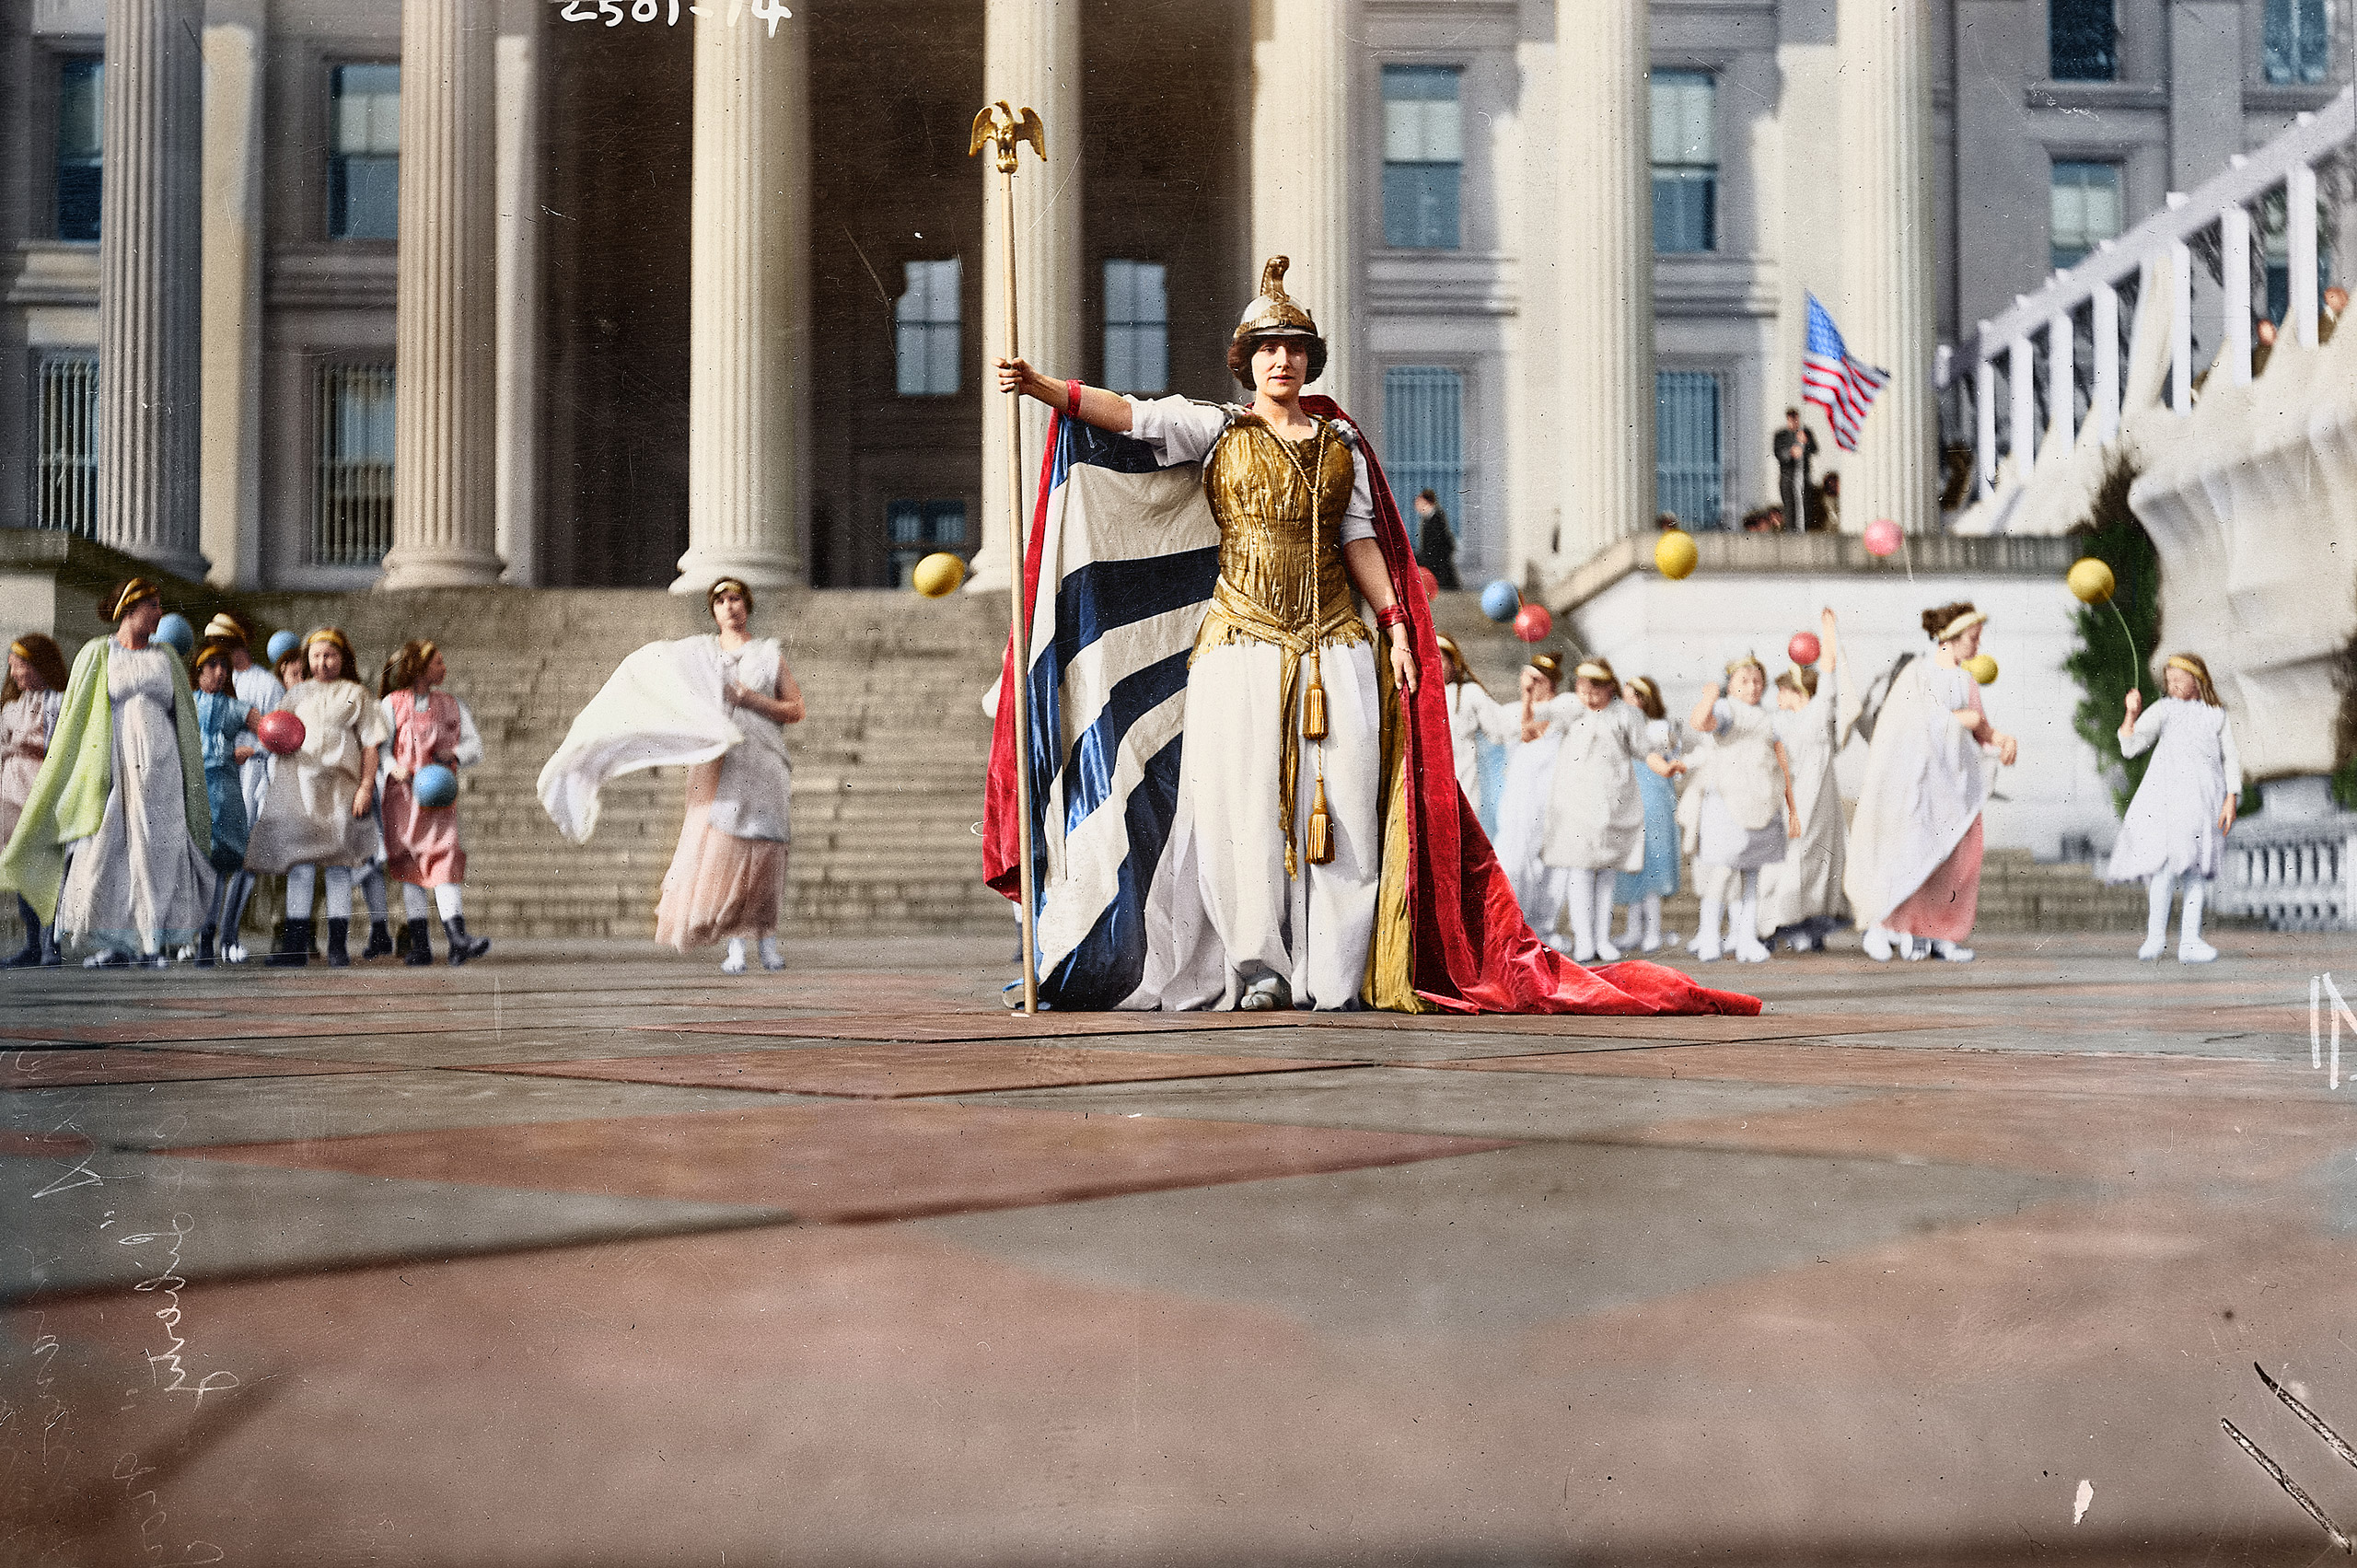 Hedwig Reicher as Columbia at the Mar. 3, 1913 Suffrage Parade in Washington, D.C.